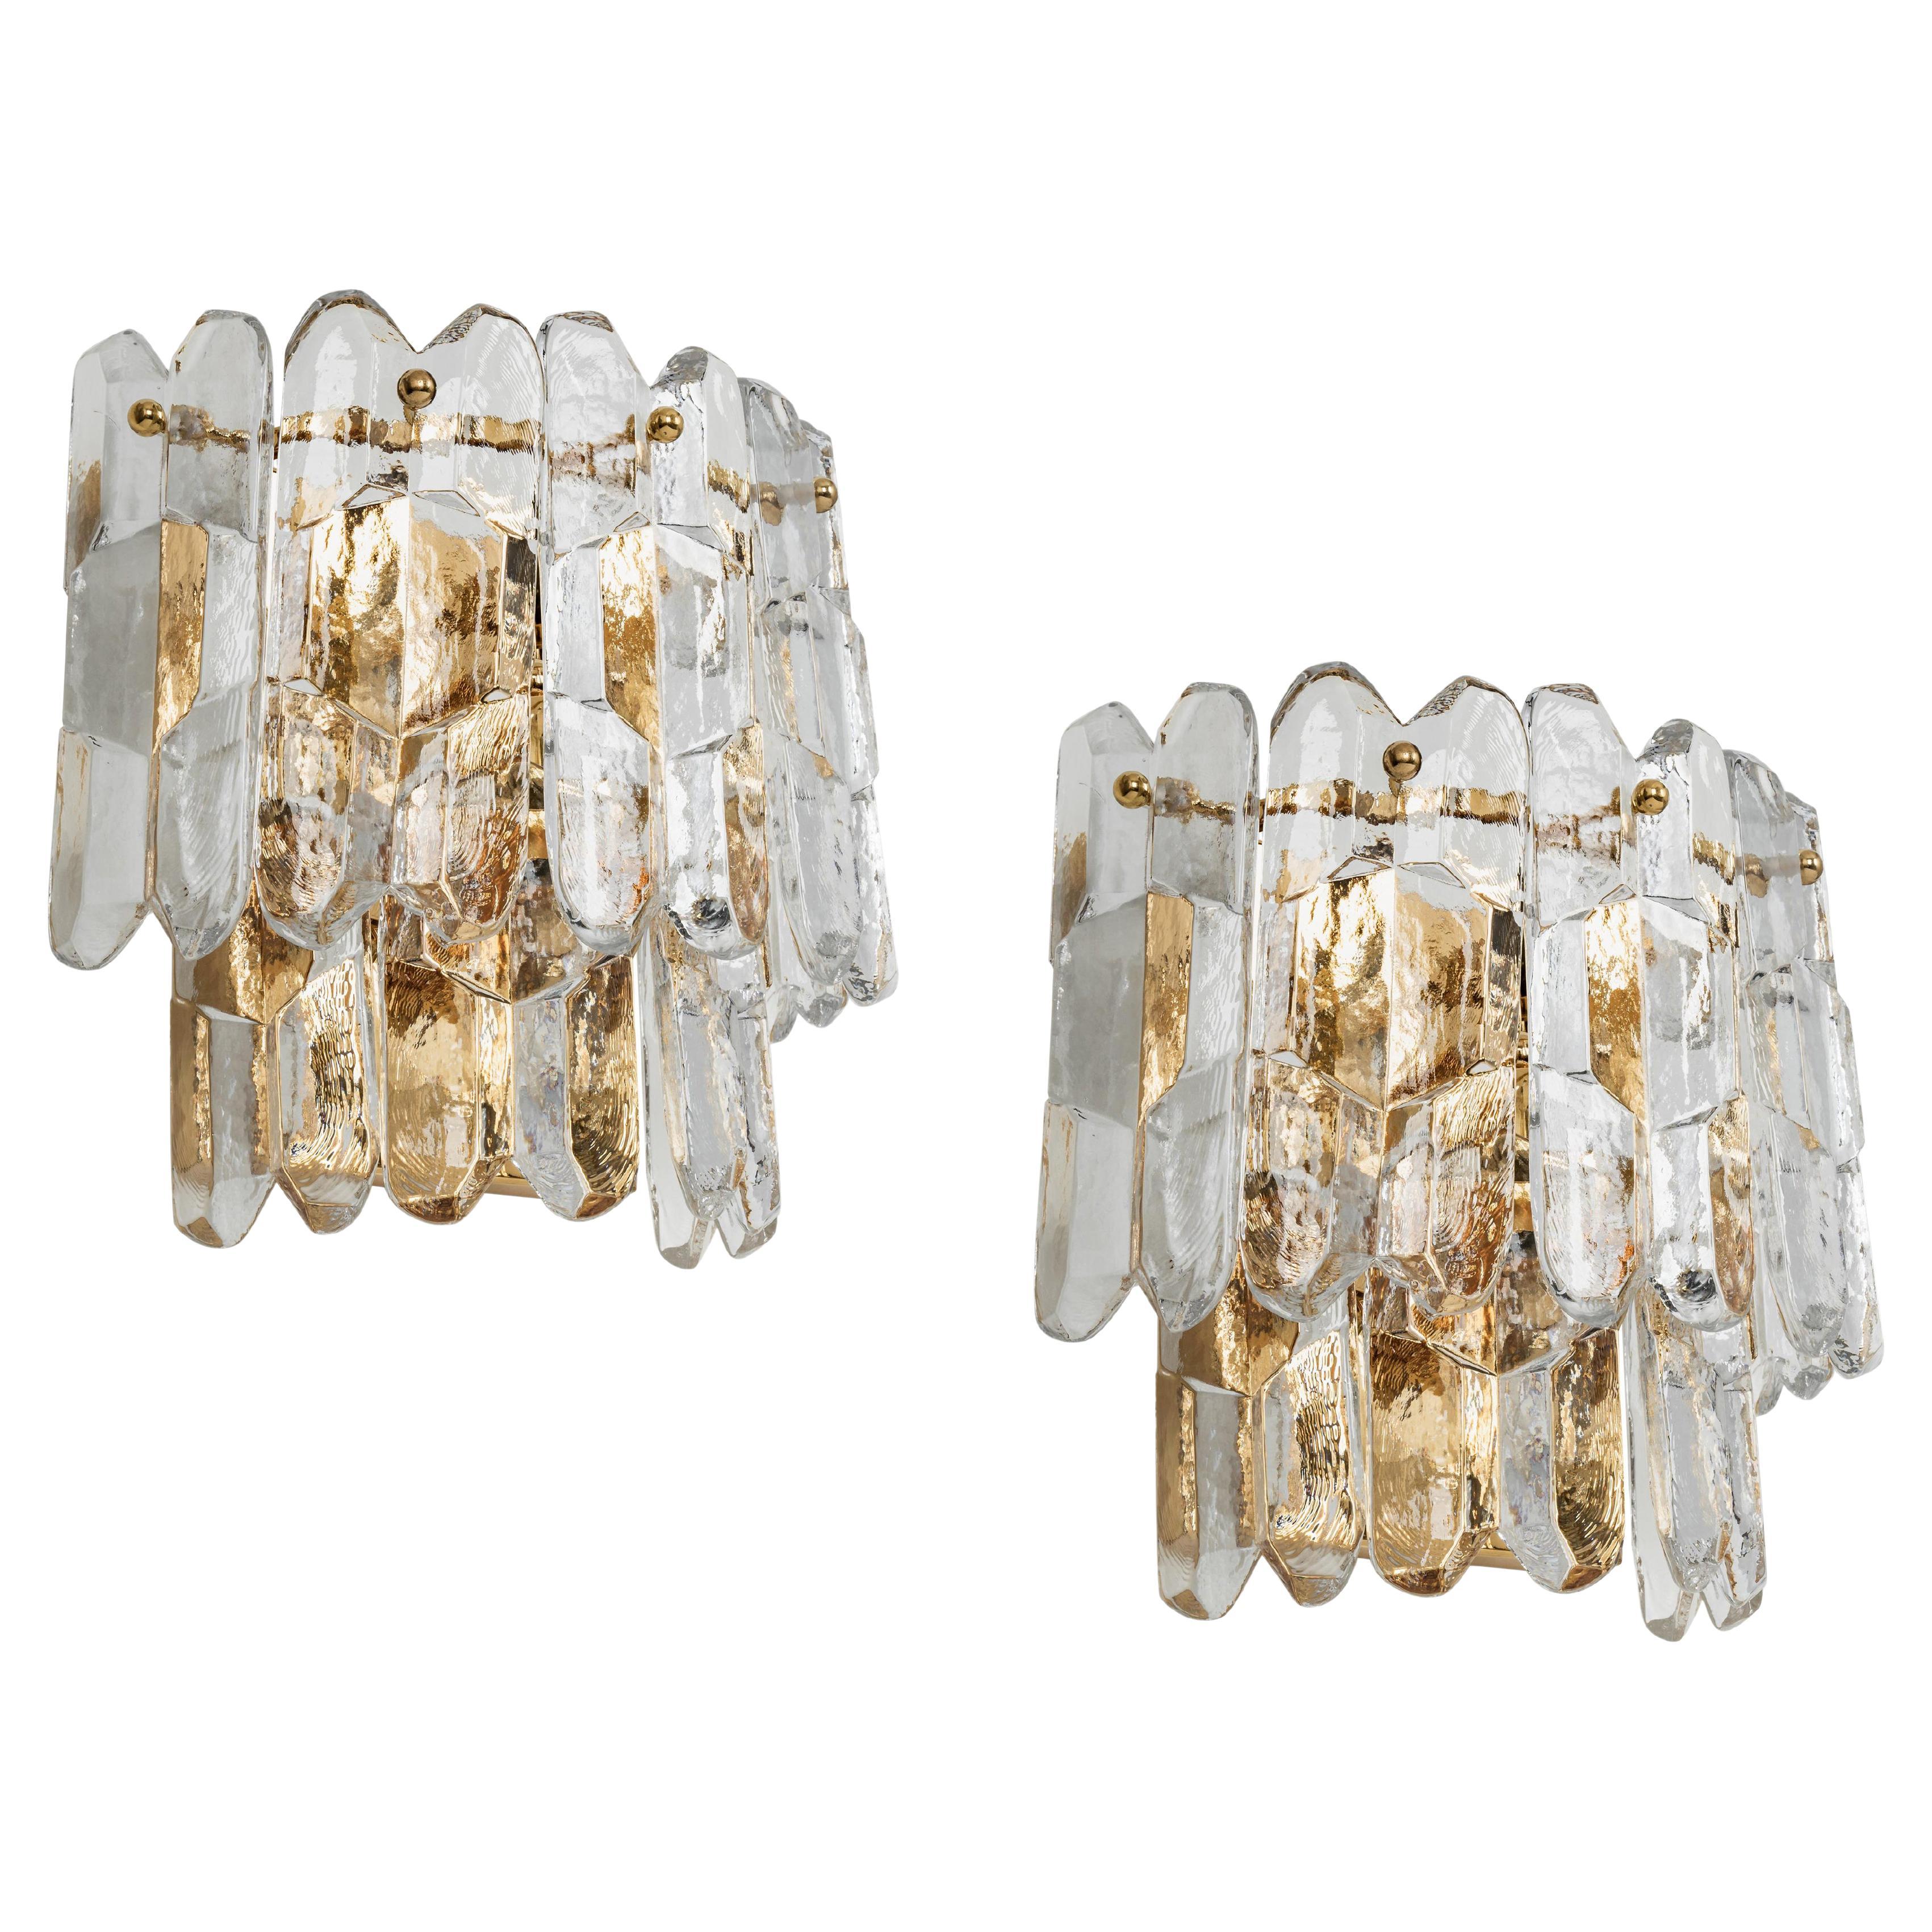 Pair of Large Kalmar Sconces Wall Lights 'Palazzo', Austria, 1960s For Sale